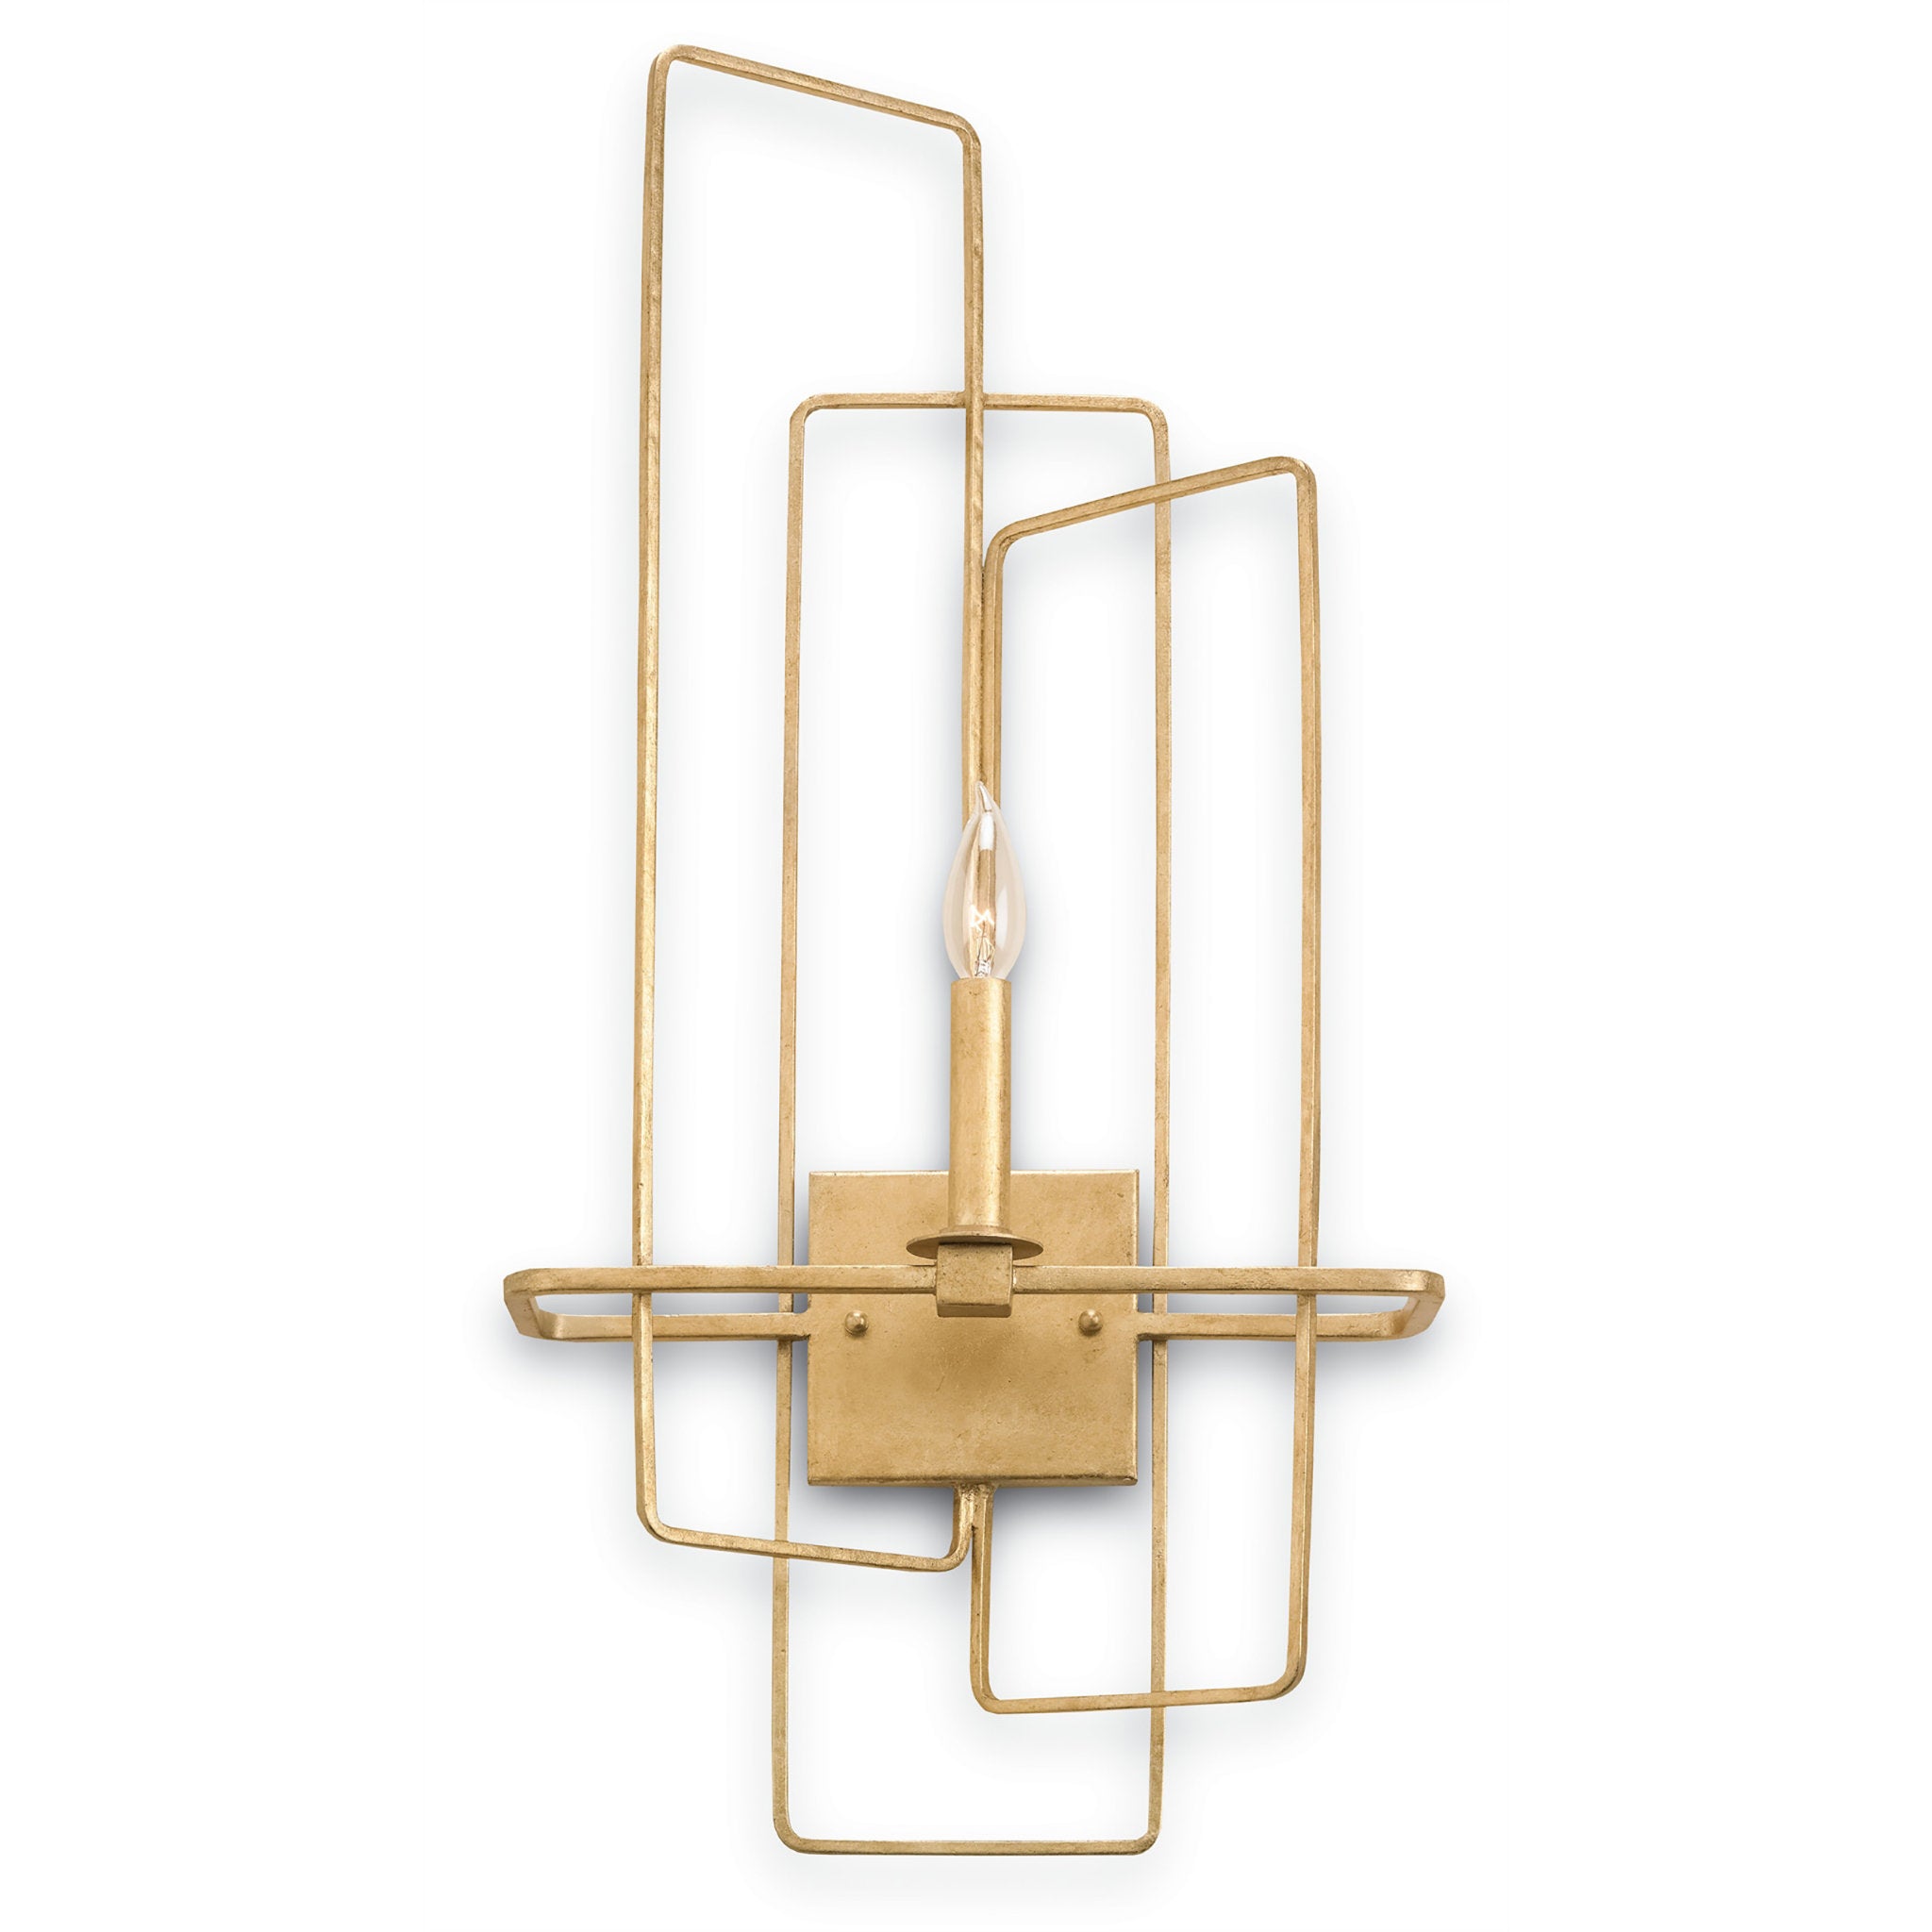 Metro Gold Wall Sconce, Left - Contemporary Gold Leaf